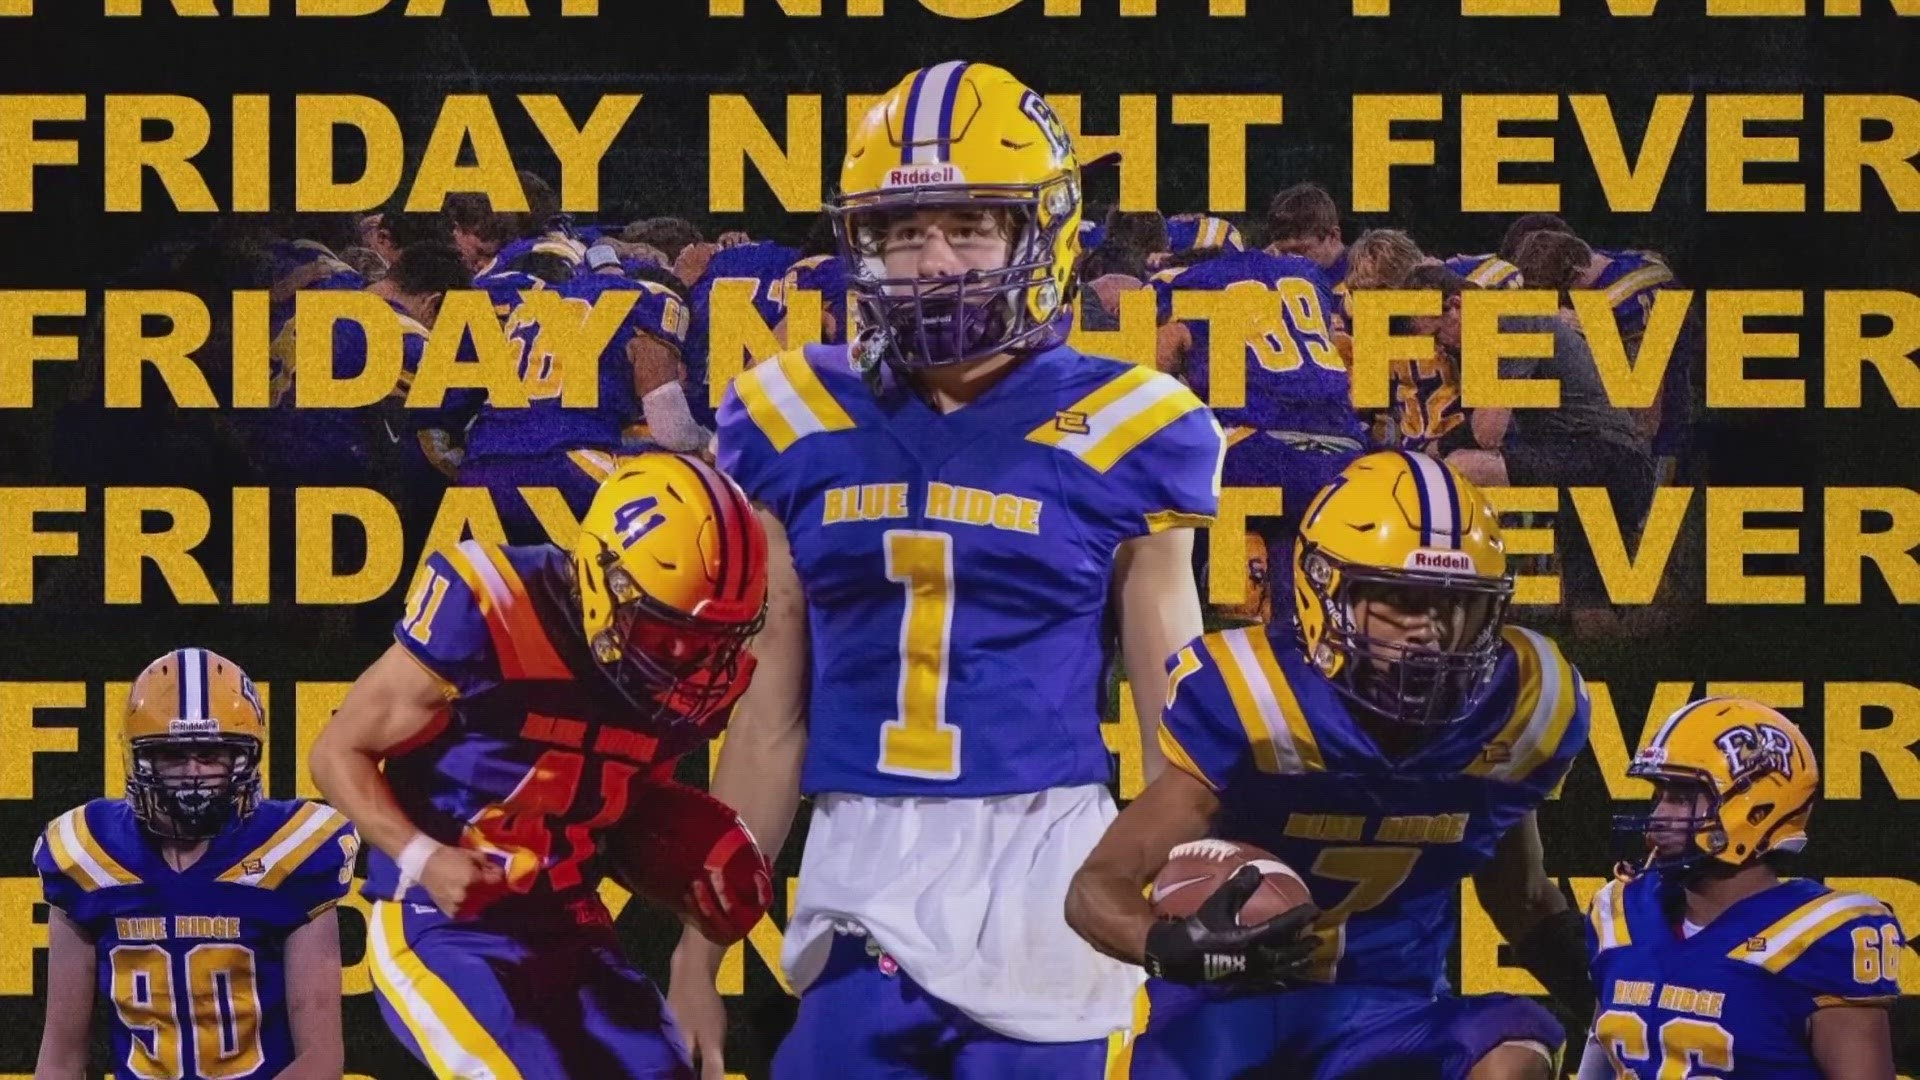 Week 3 Friday Night Fever Game of the Week revealed!